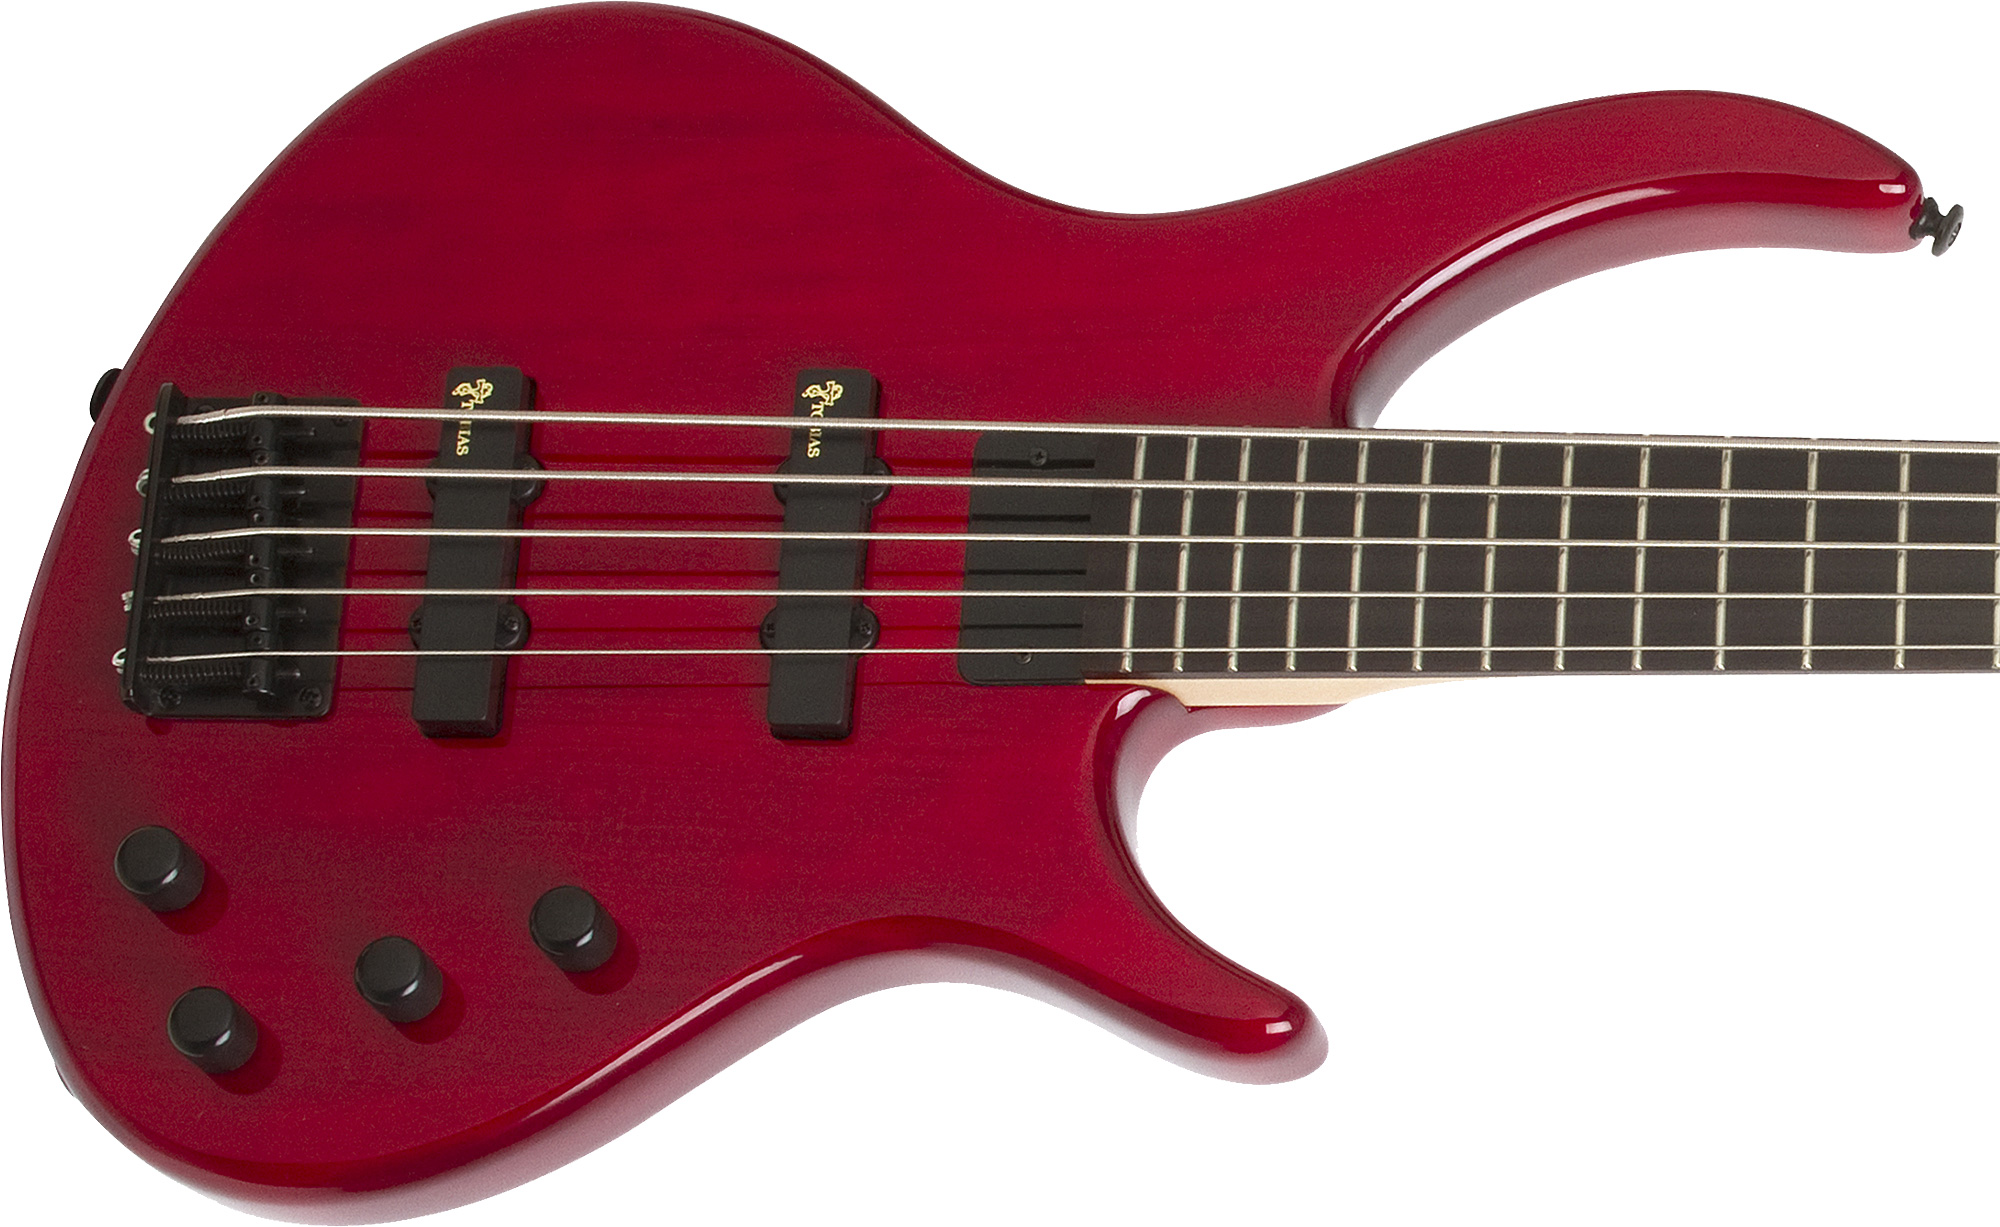 Epiphone Toby Deluxe V Bass Bh - Trans Red - Basse Électrique Solid Body - Variation 1